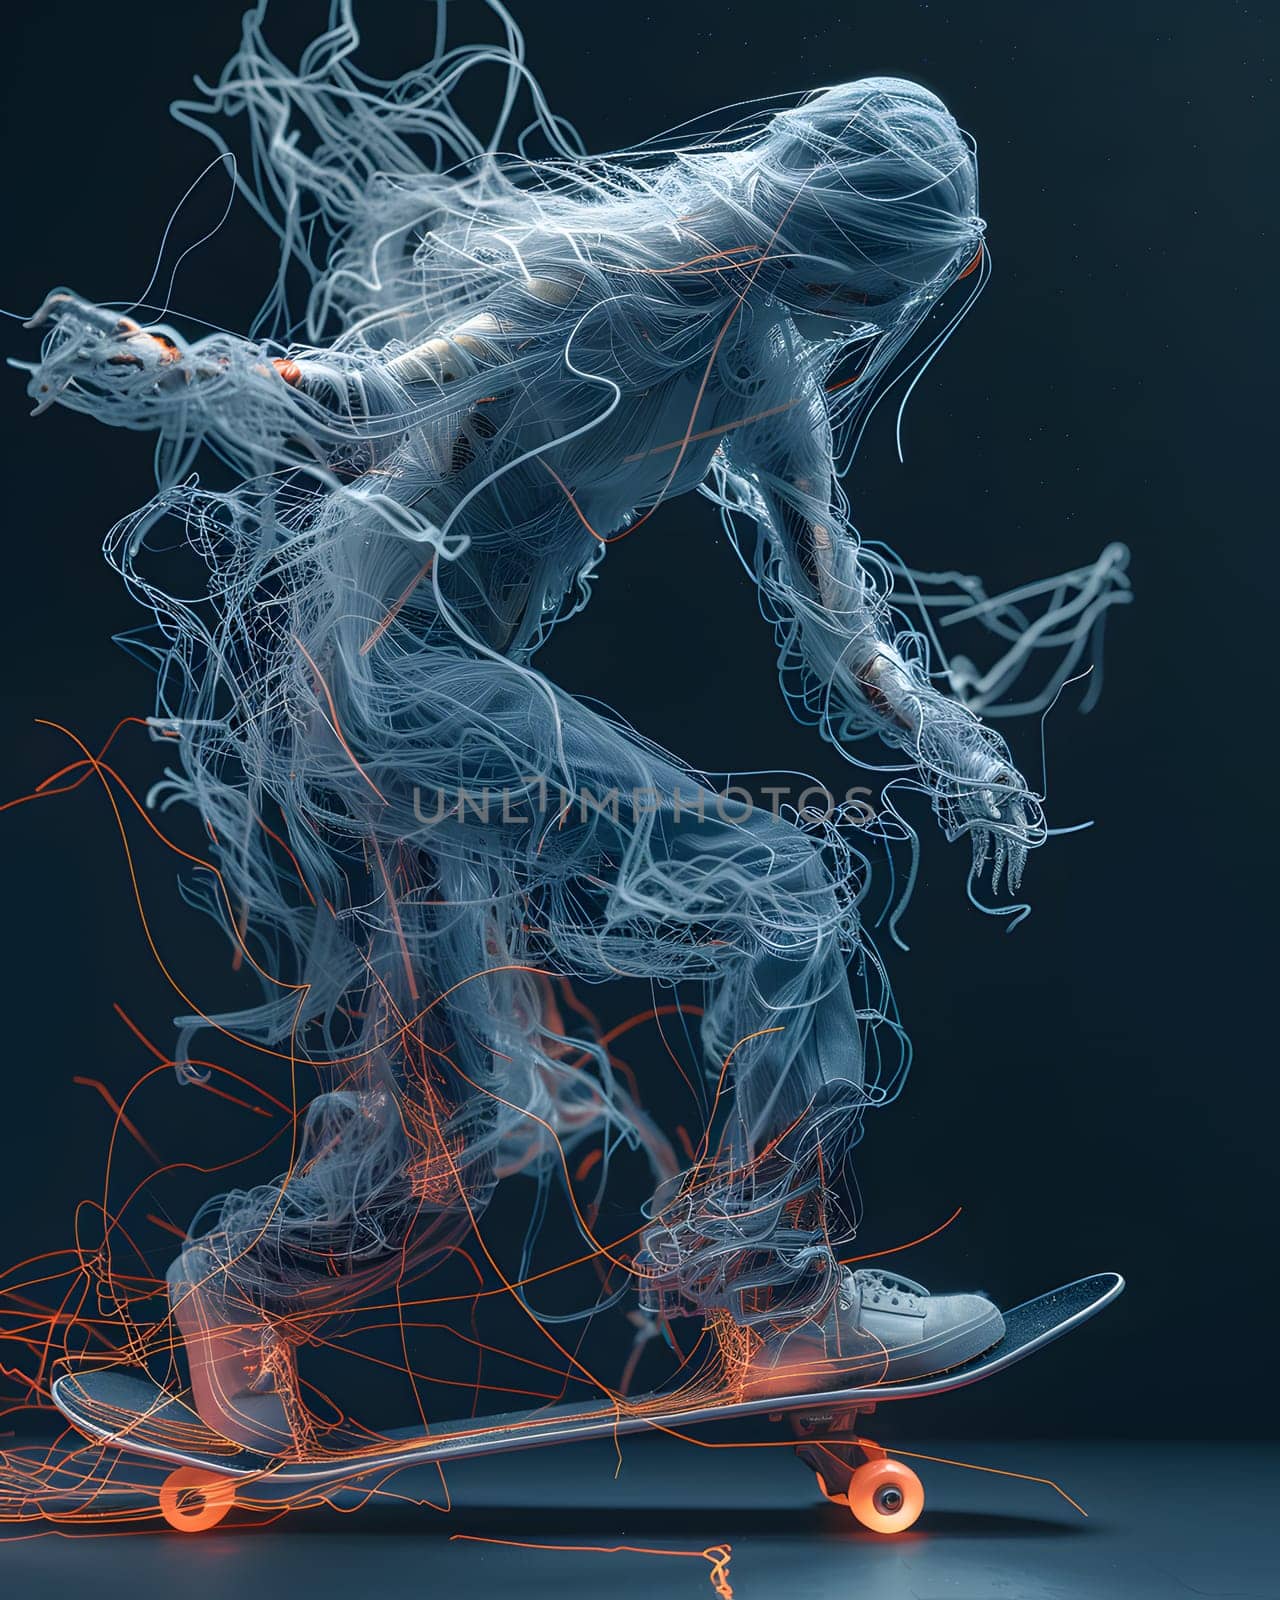 CG artwork of organism on skateboard with electric blue smoke by Nadtochiy